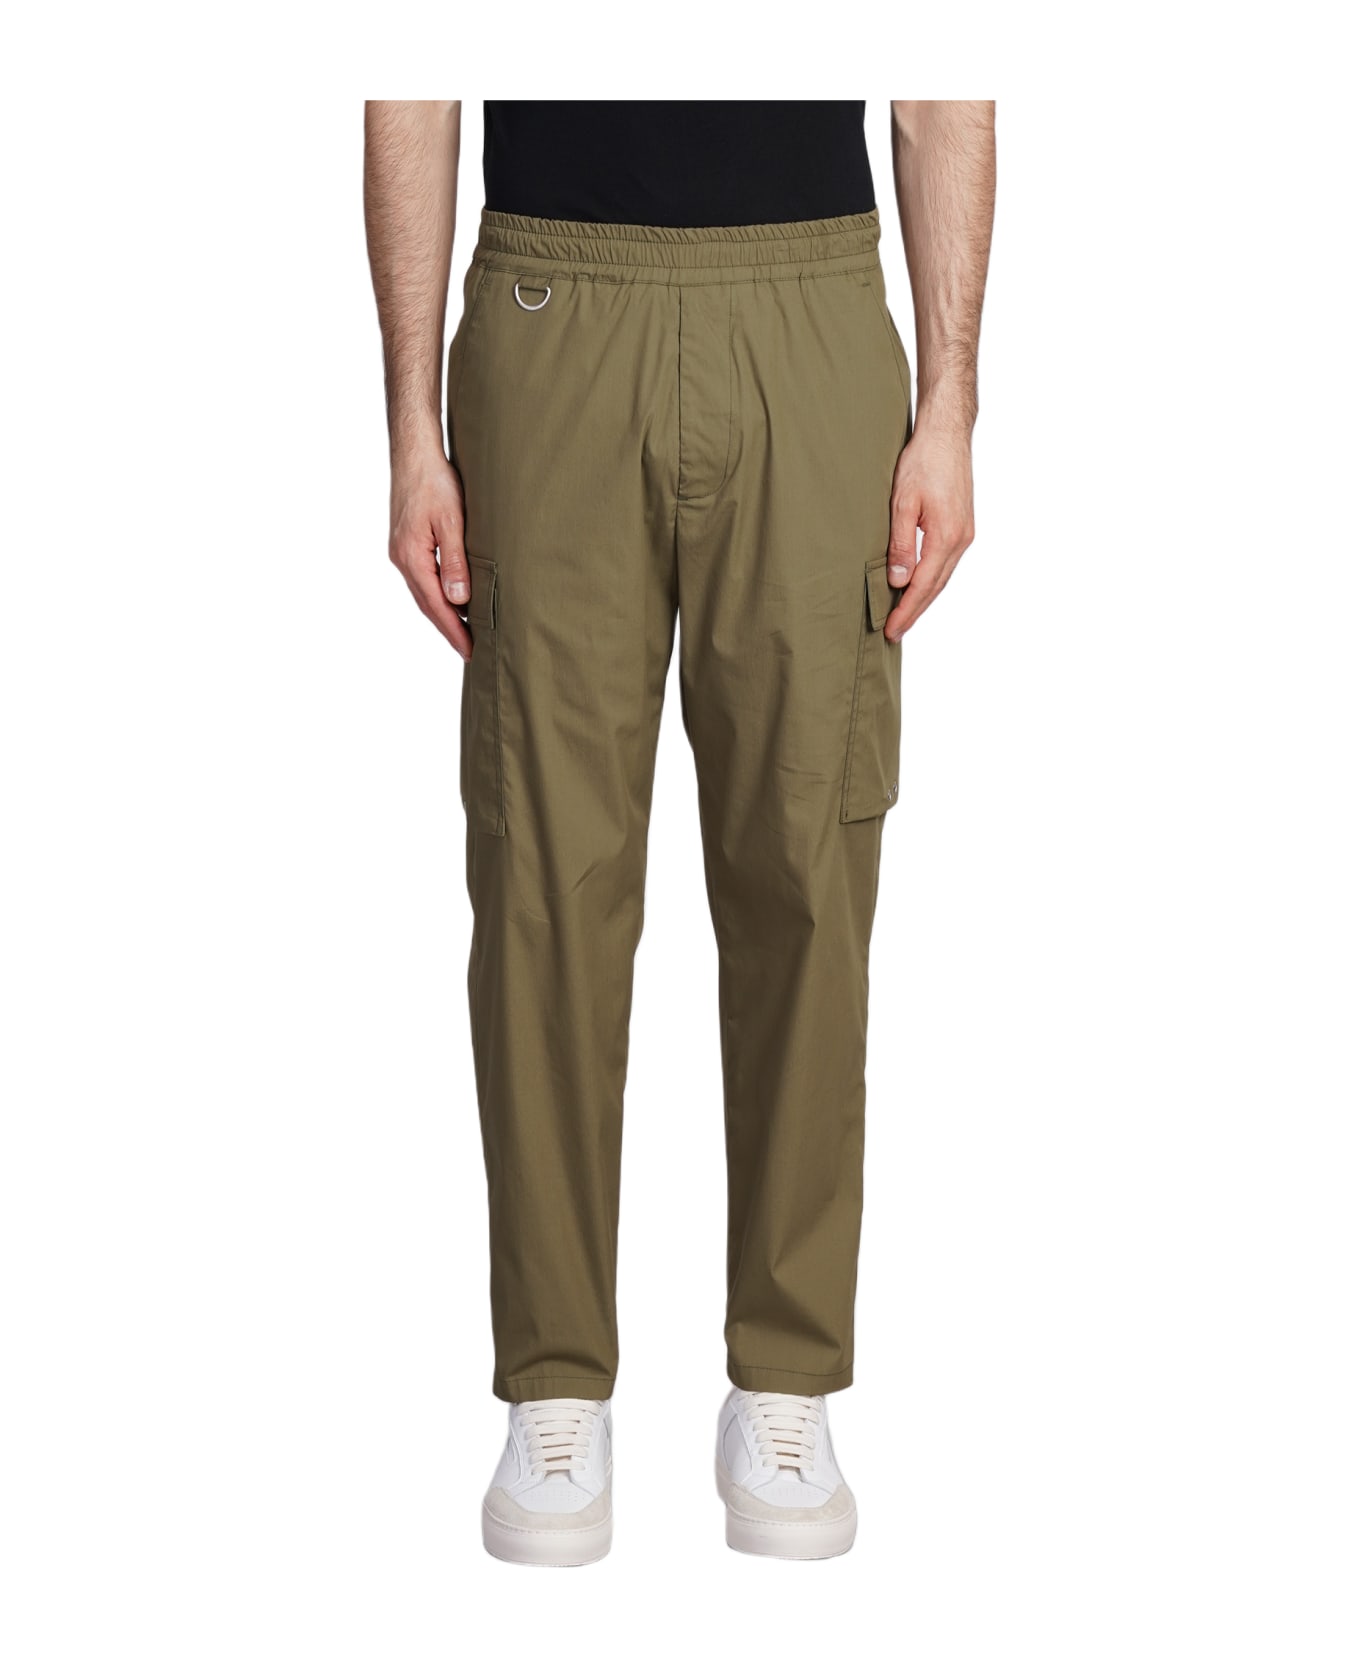 Low Brand Combo Pants In Green Cotton - green